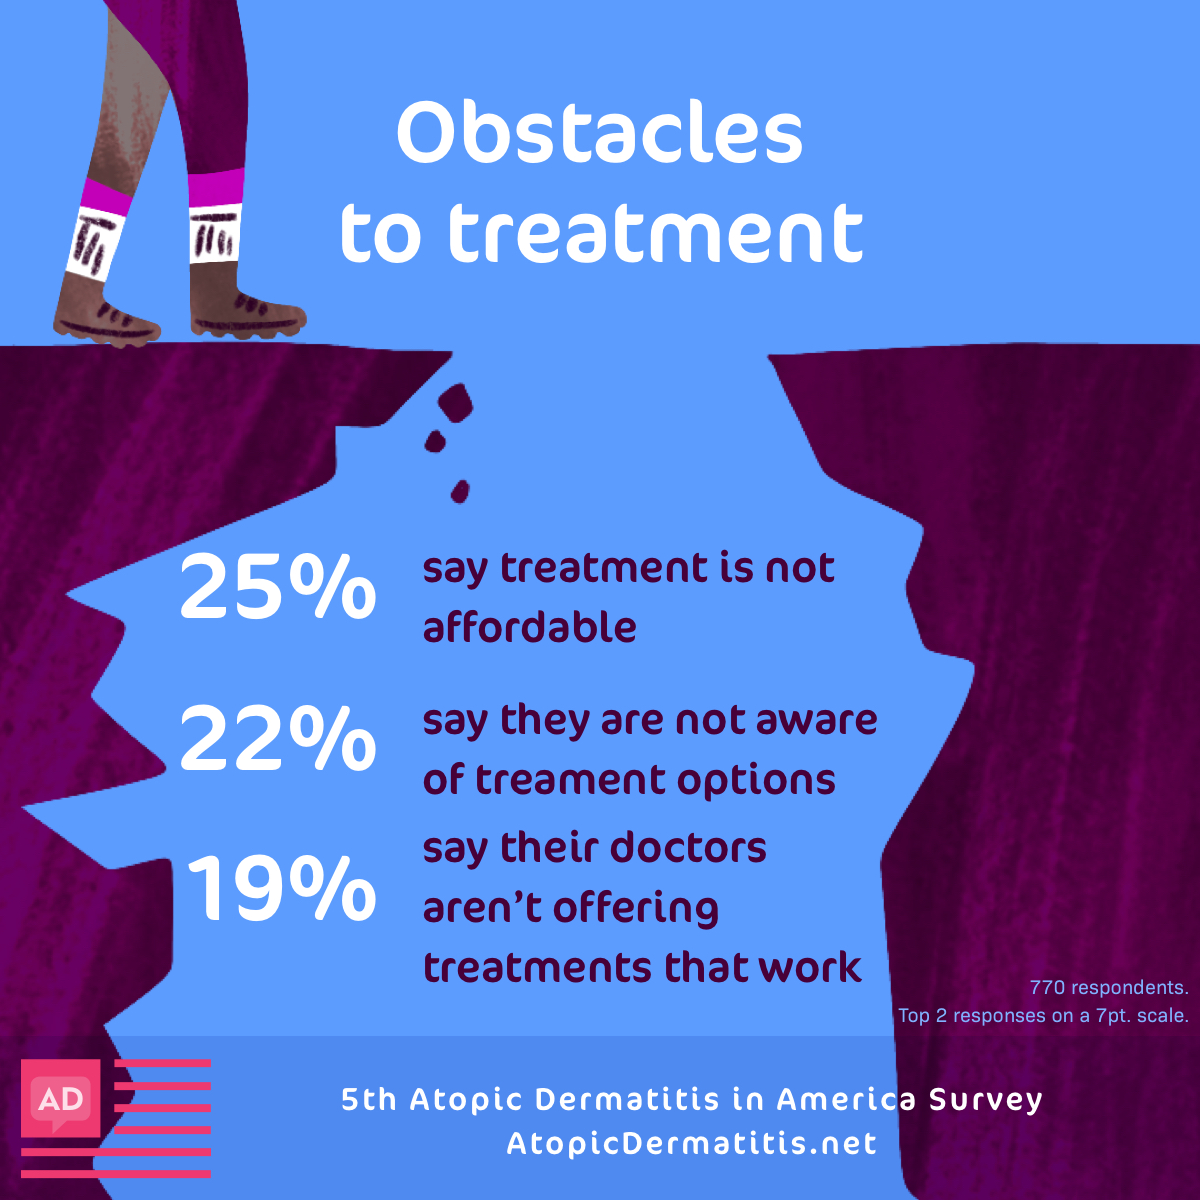 25% of respondents say treatment for atopic dermatitis isn’t affordable.